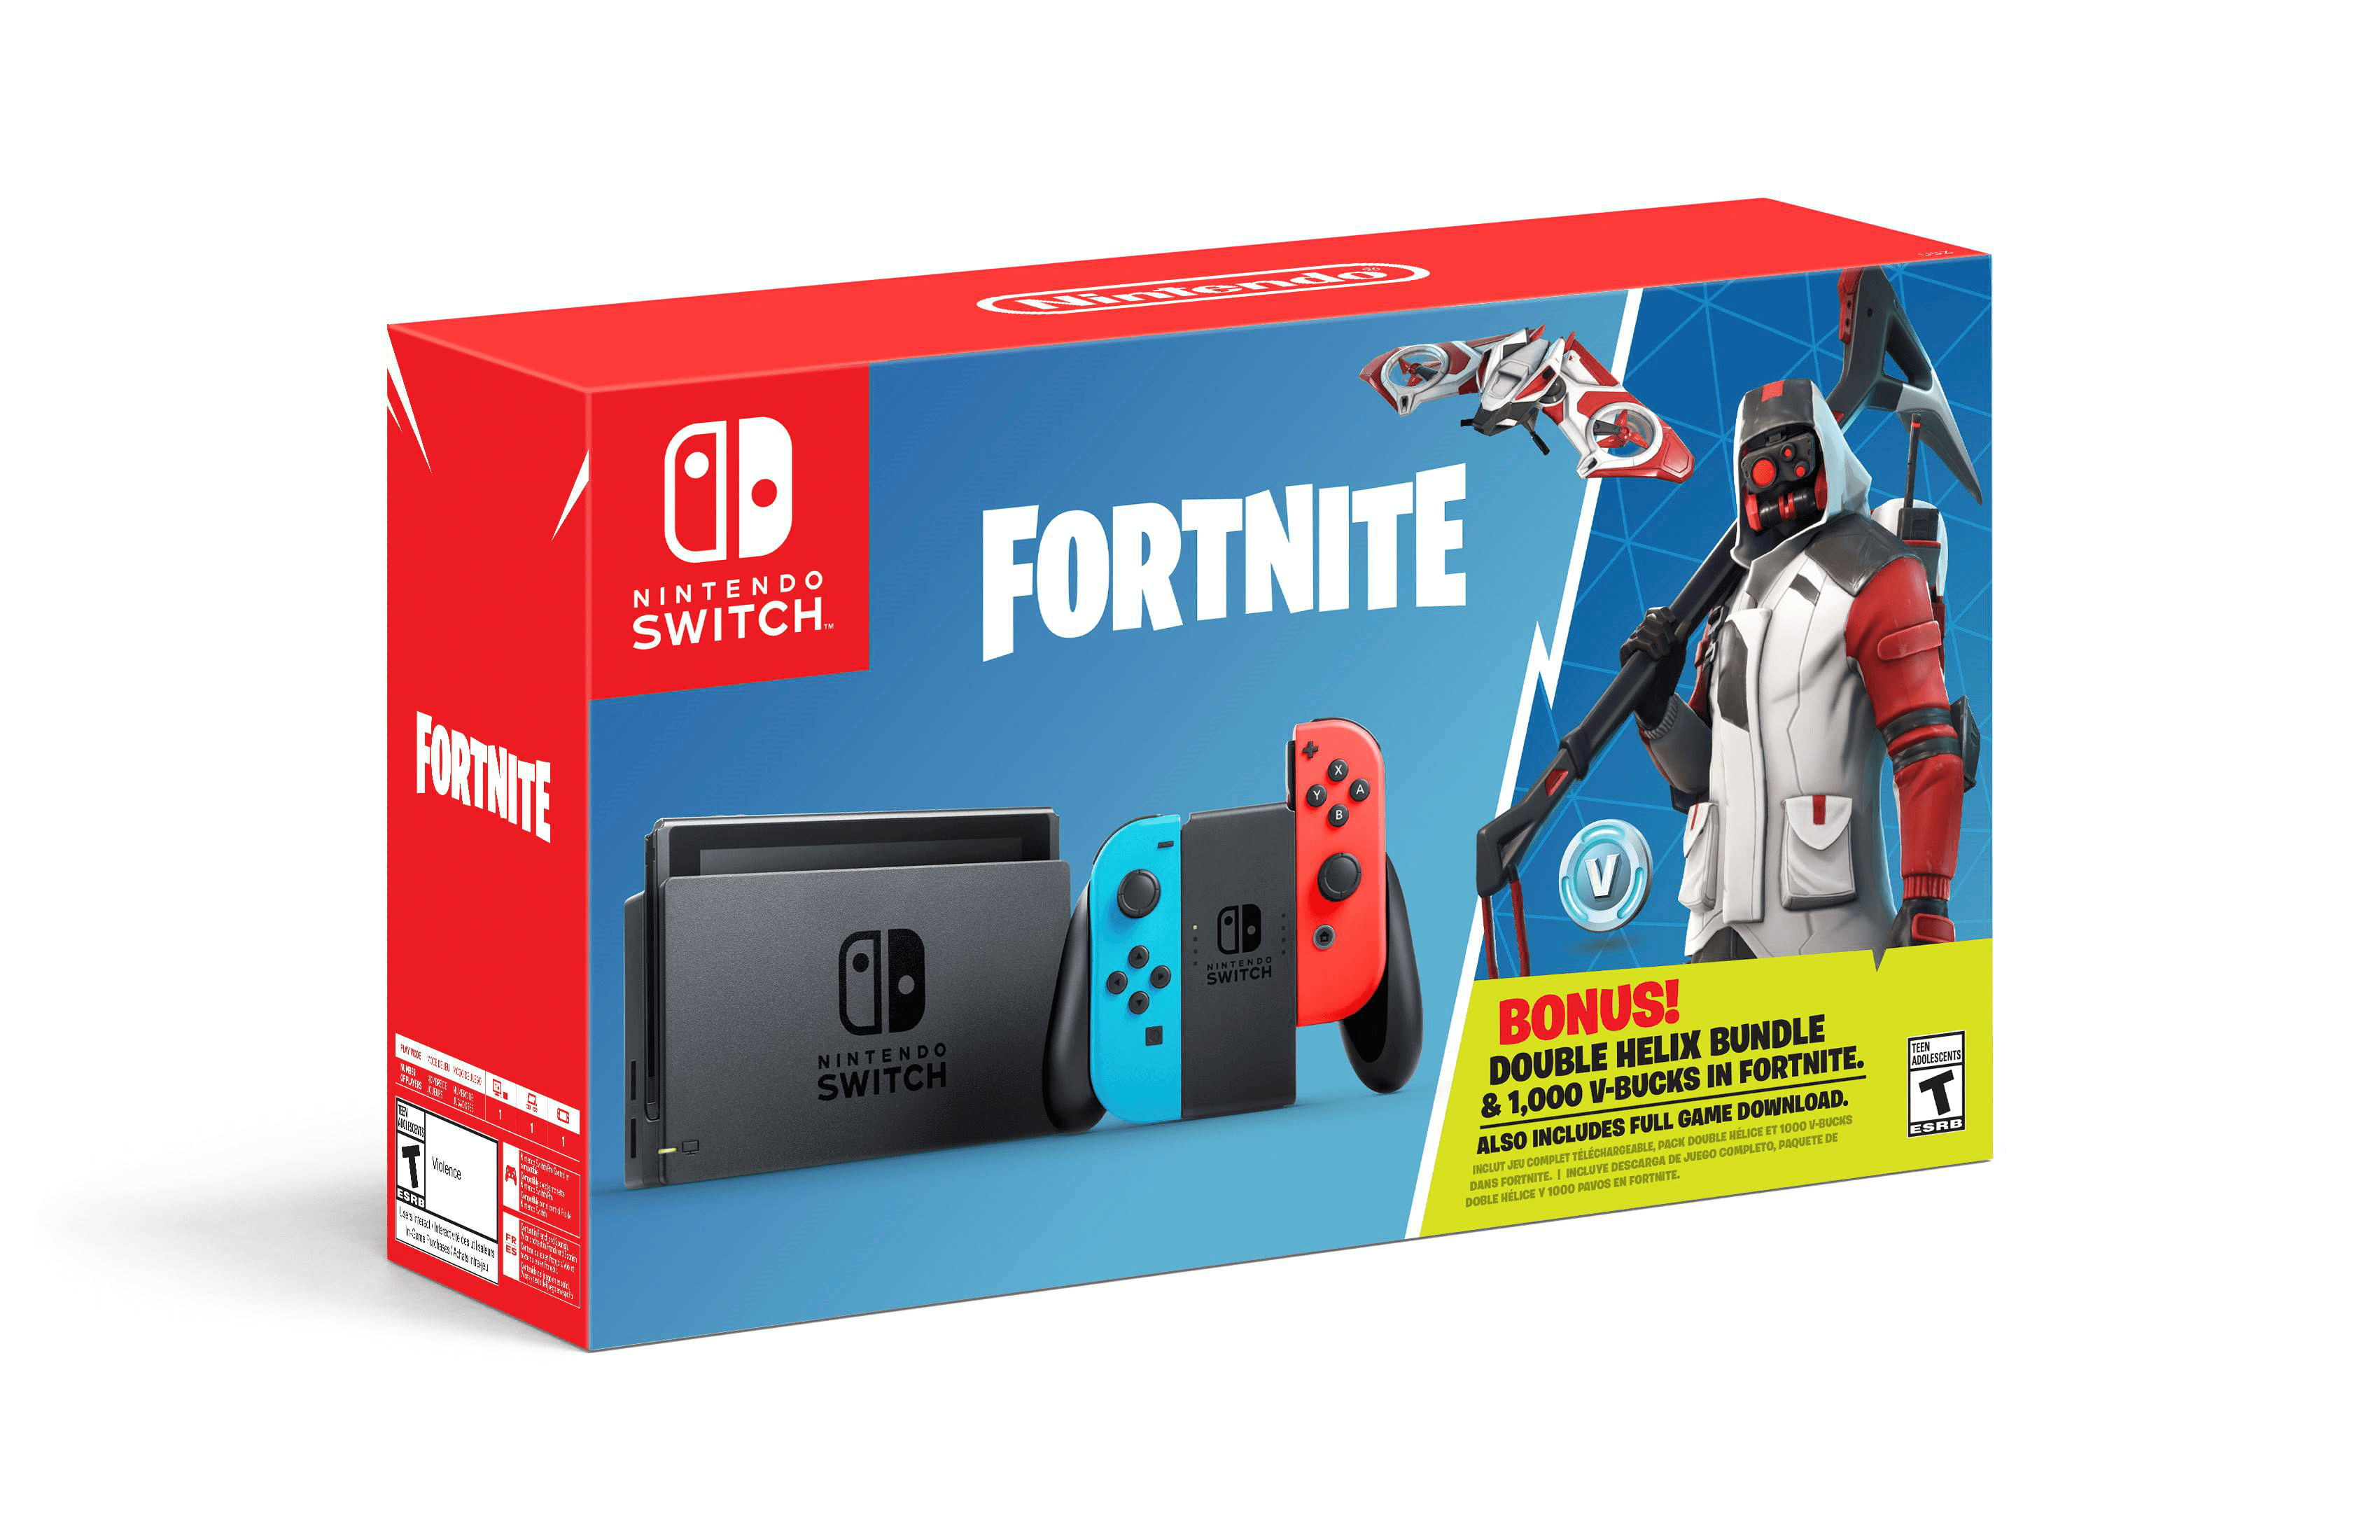 Fortnite – Double Helix Nintendo Switch bundle with special content and V-bucks-bucks hits stores Oct. 5